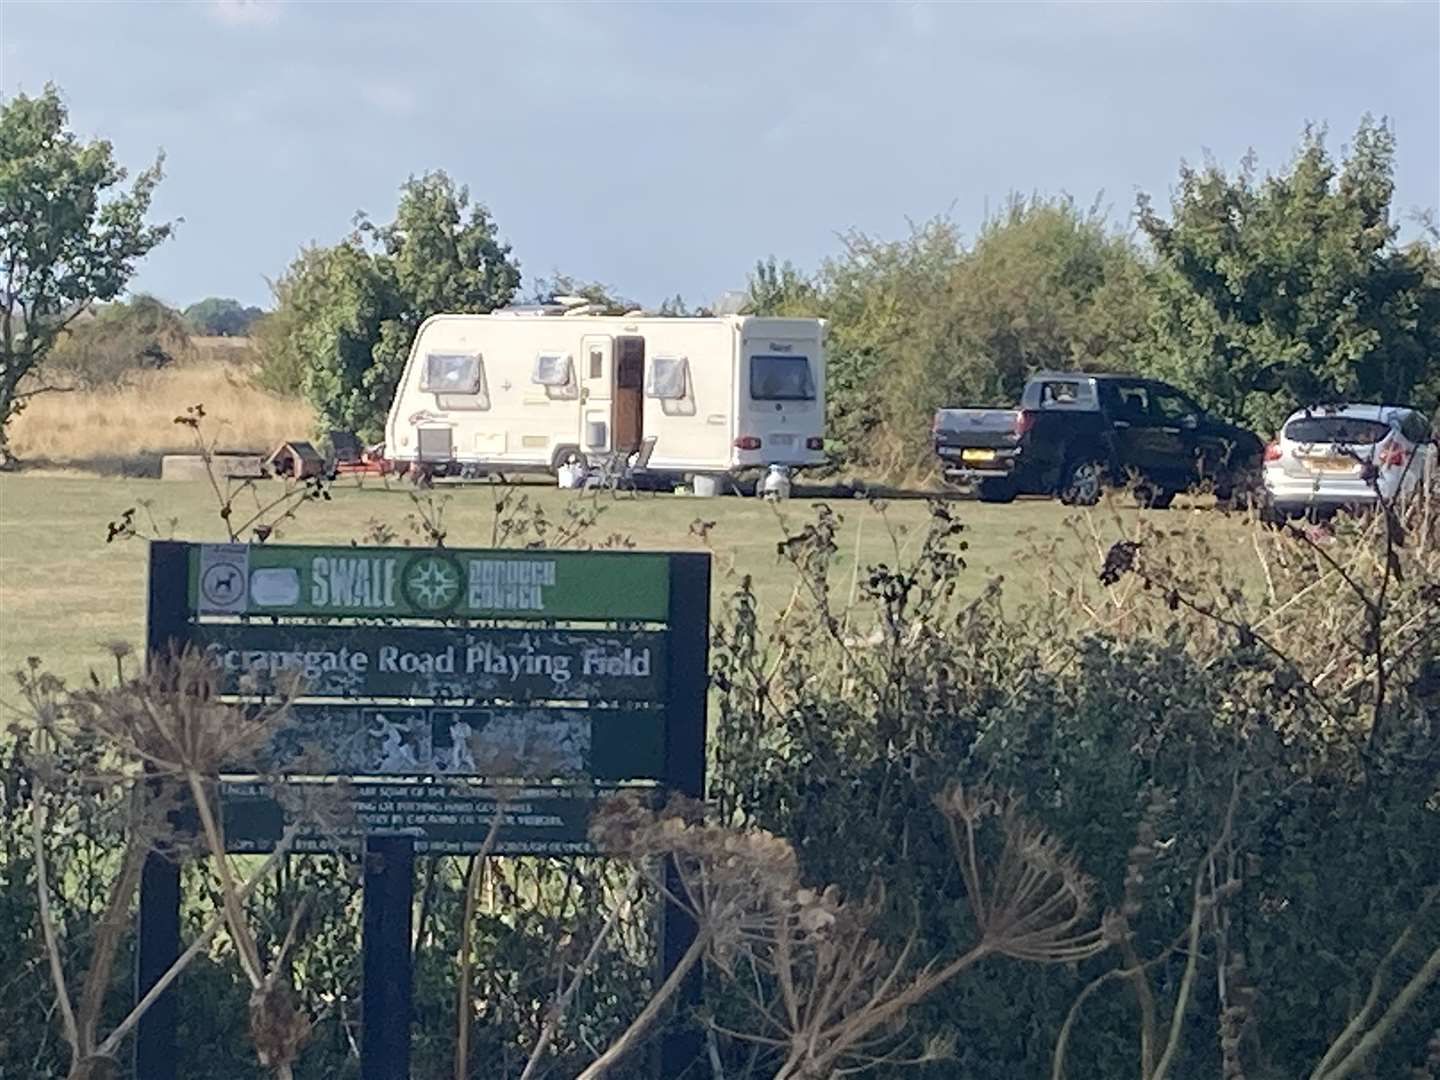 Travellers camped at Scrapsgate Road playing fields at Minster